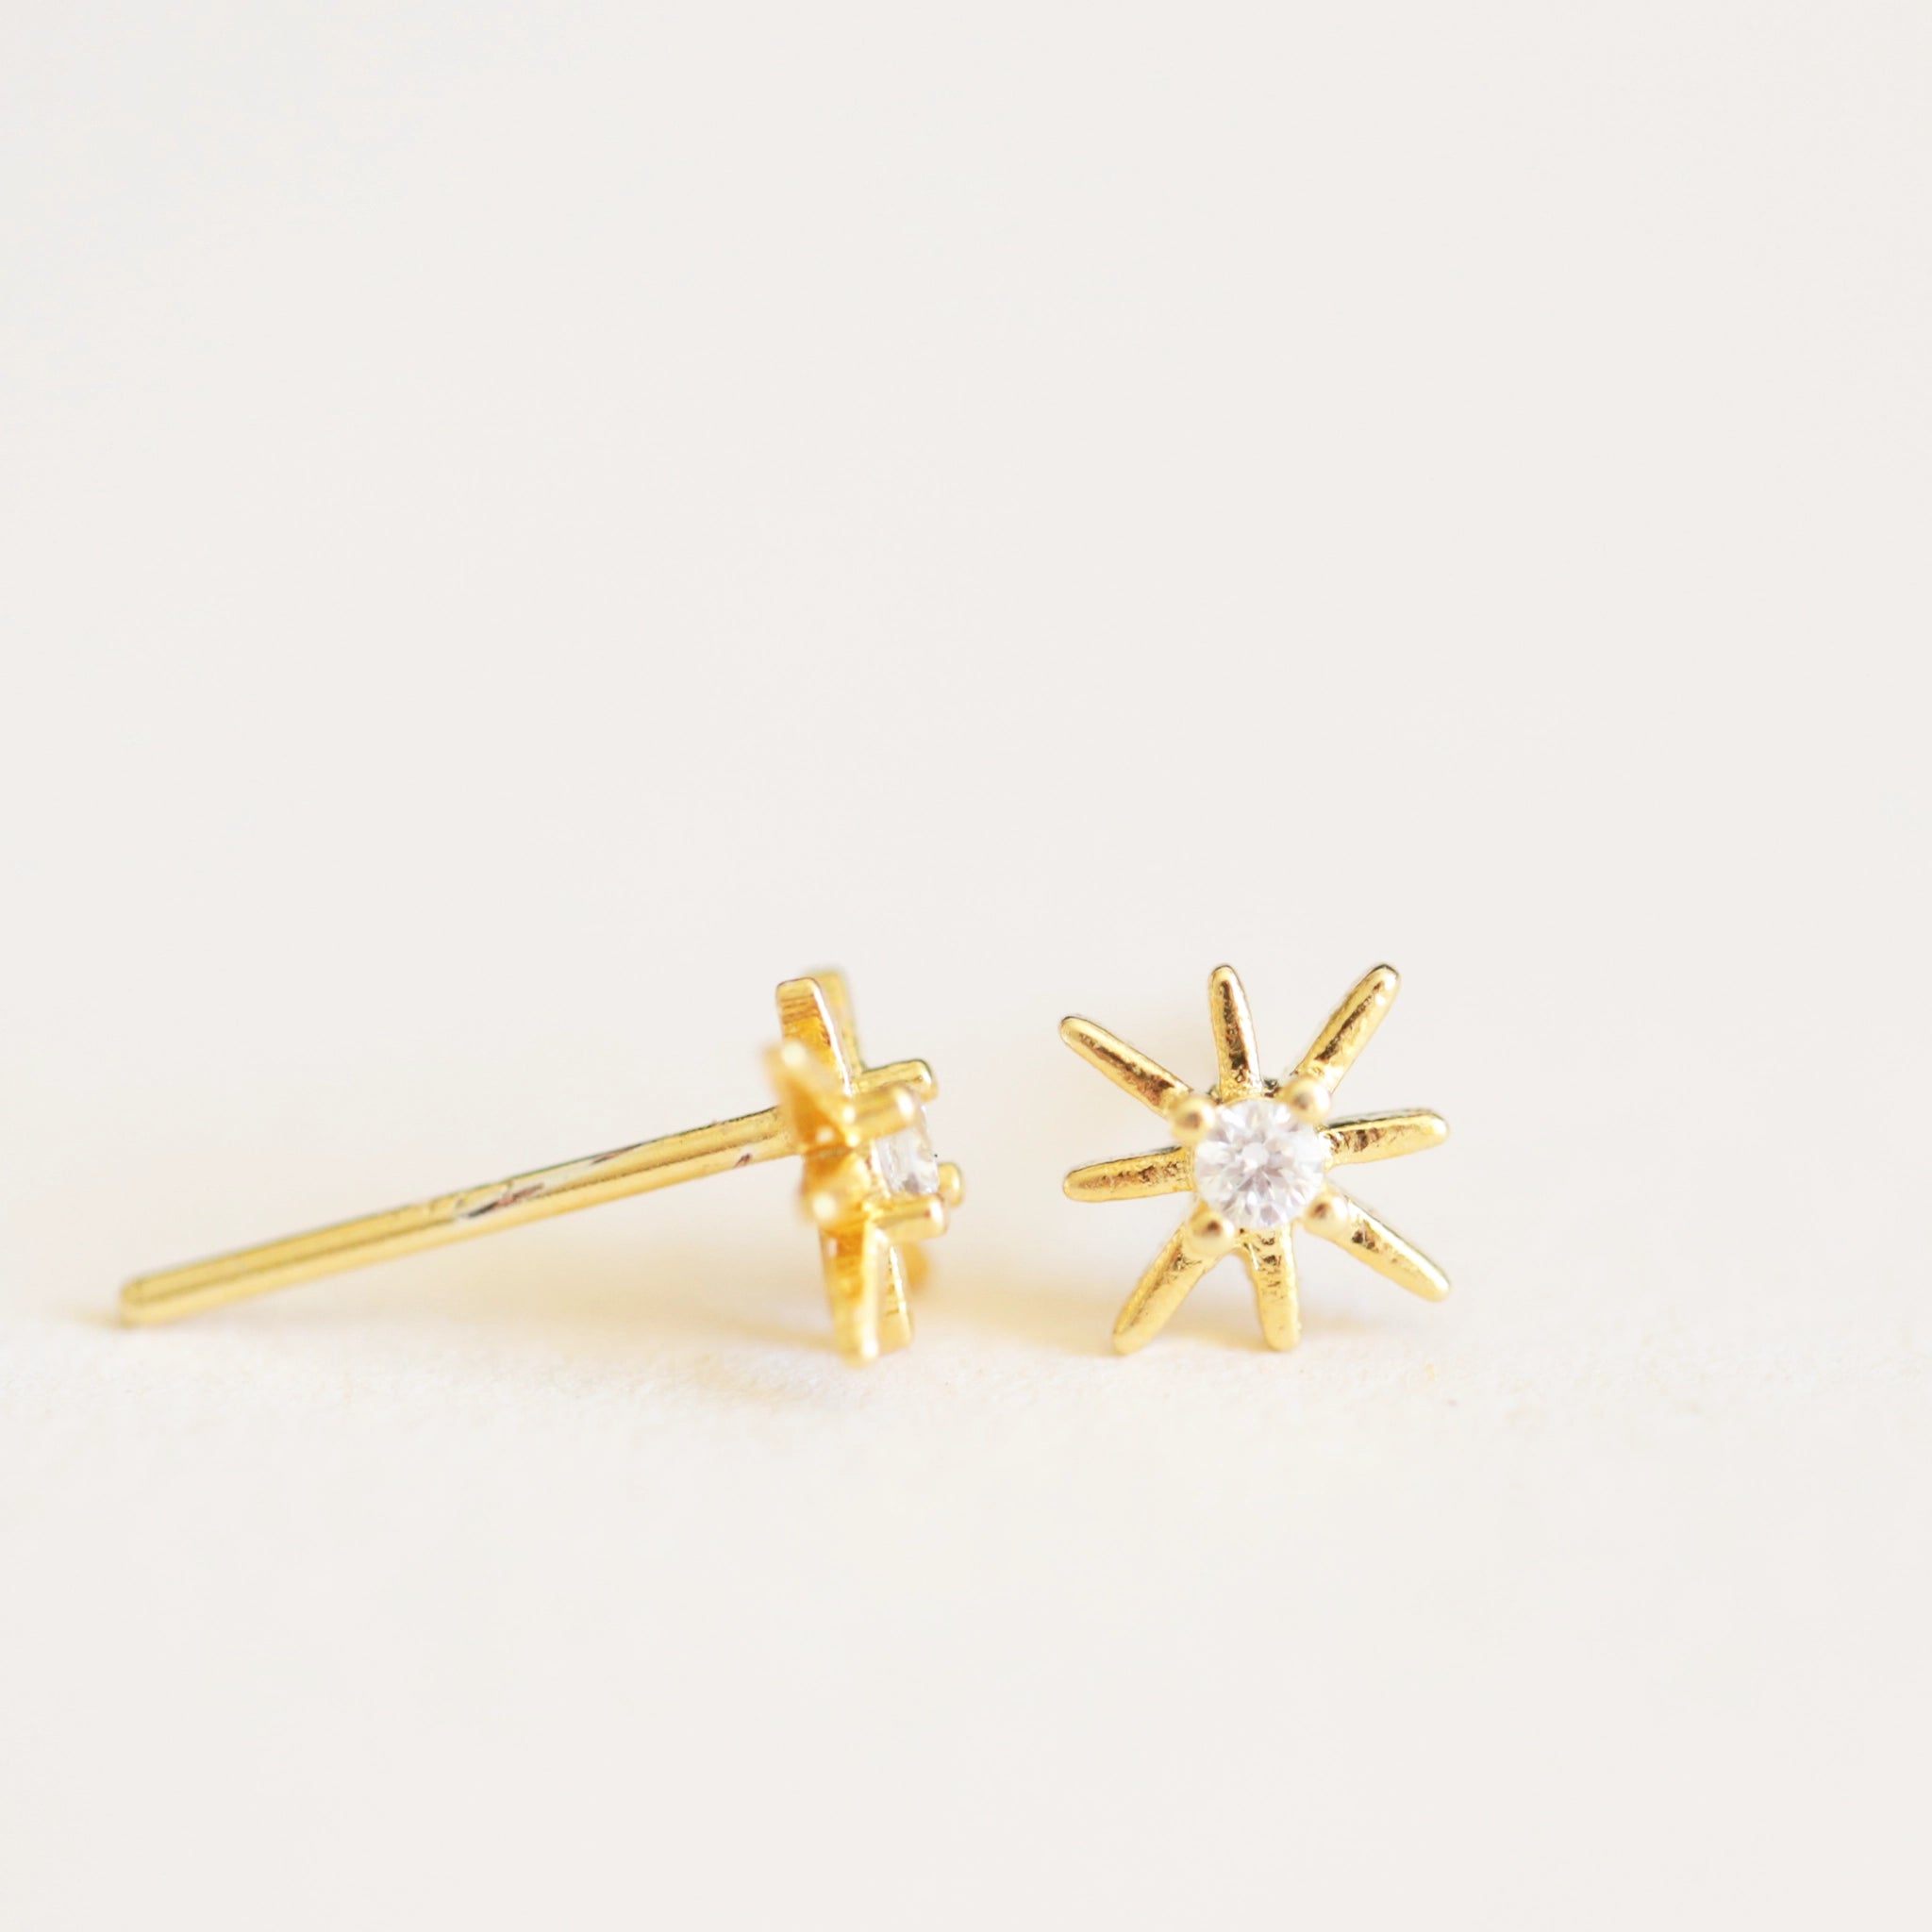 On an ivory background is a pair of dainty gold star earrings with a CZ stone in the center